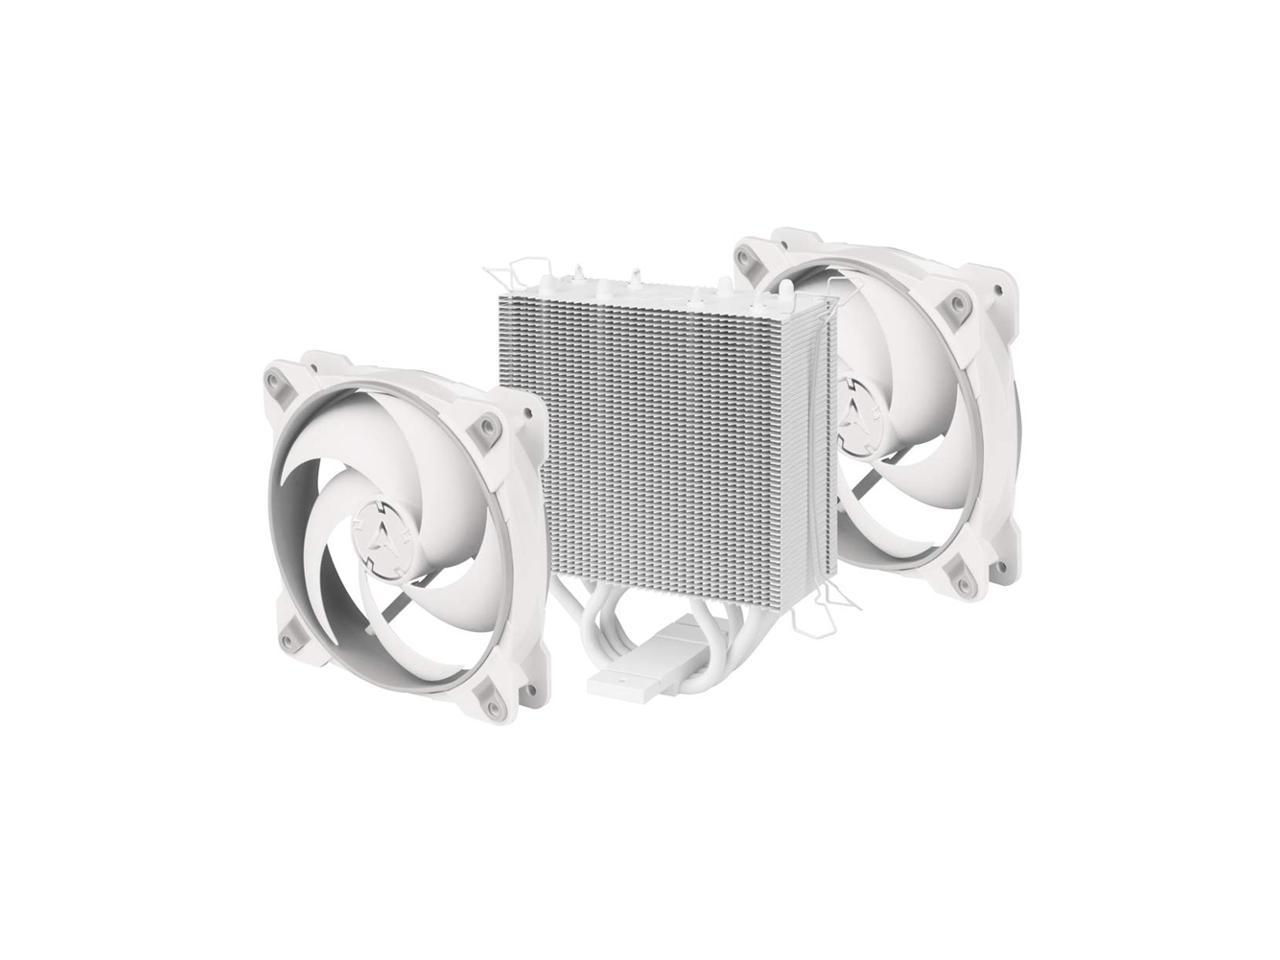 Arctic ACFRE00074A Freezer 34 eSports DUO Tower CPU Cooler Grey/White